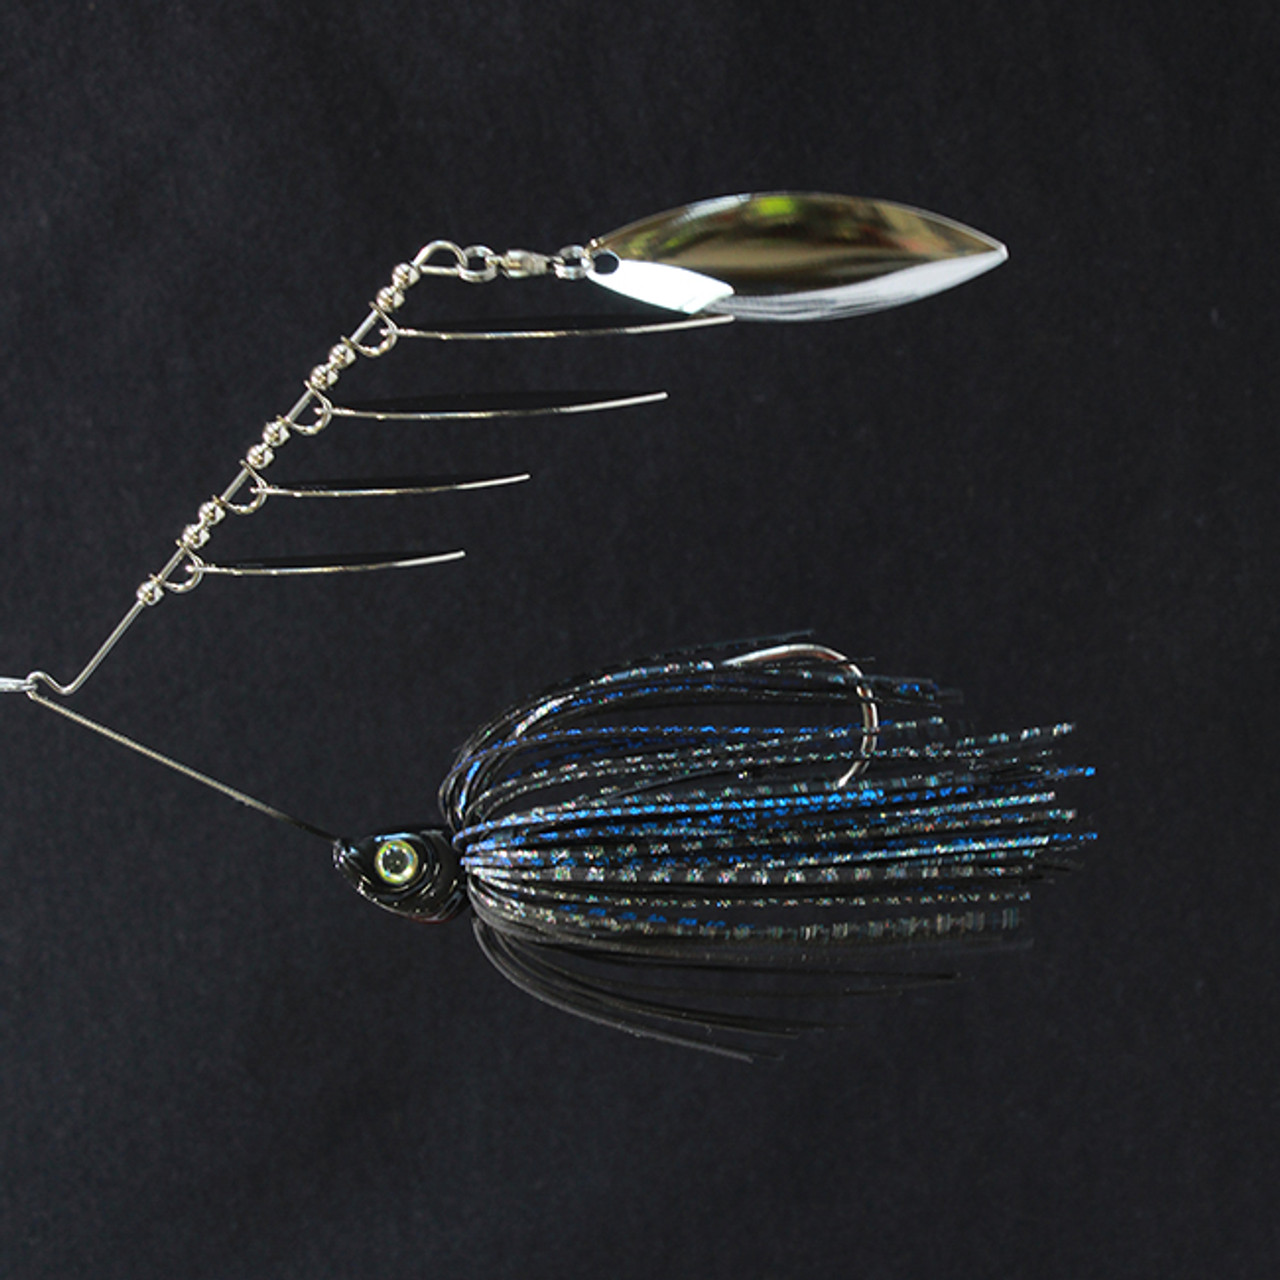 ScatterShad™ FH-5 Spinnerbait For Bass Fishing.